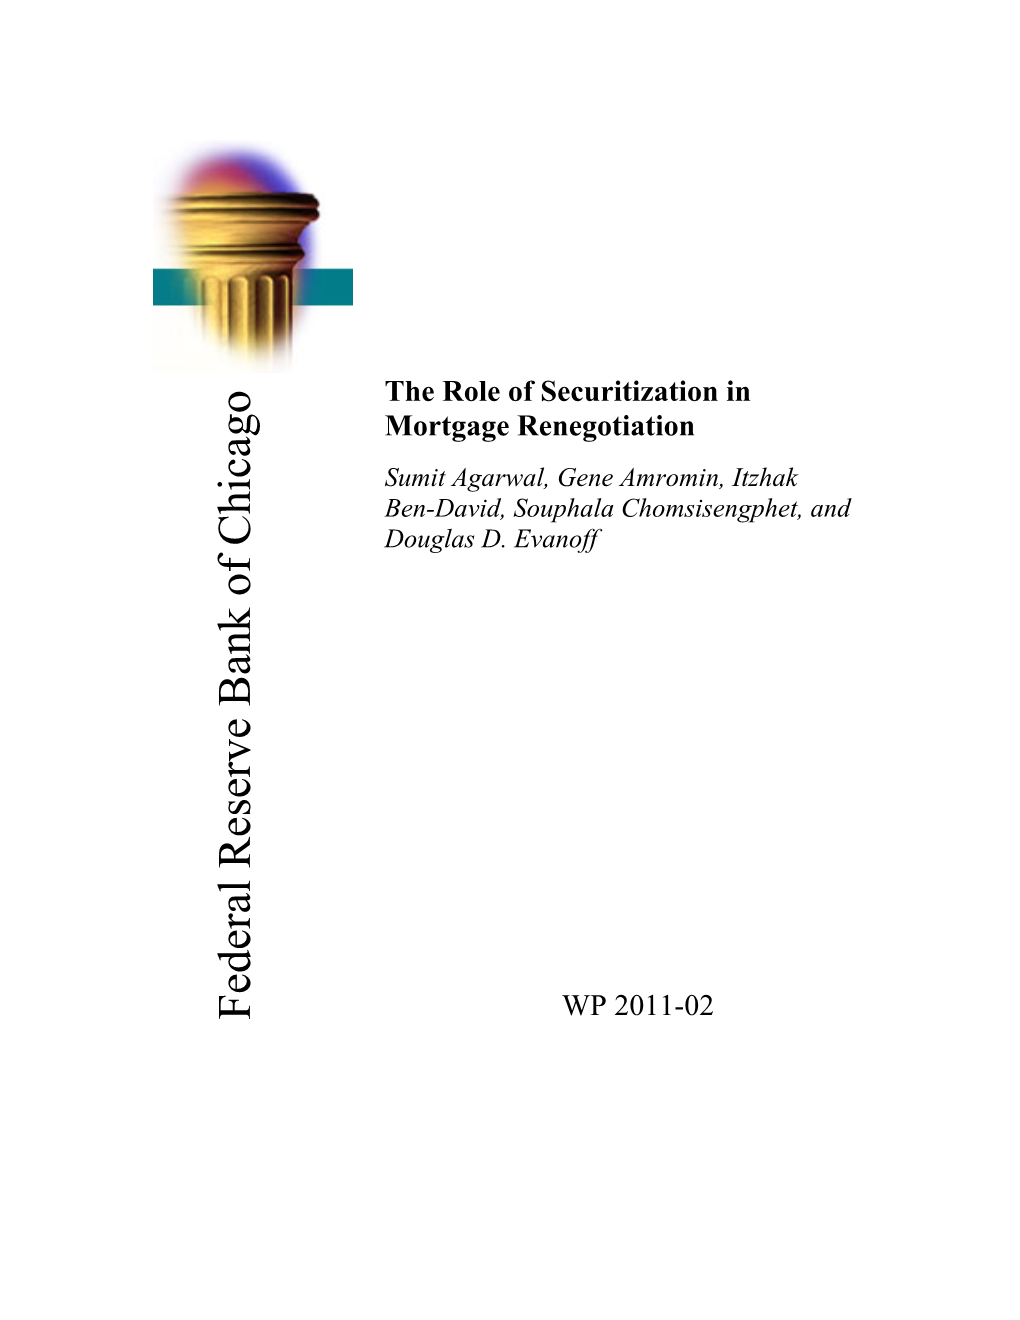 The Role of Securitization in Mortgage Renegotiation;